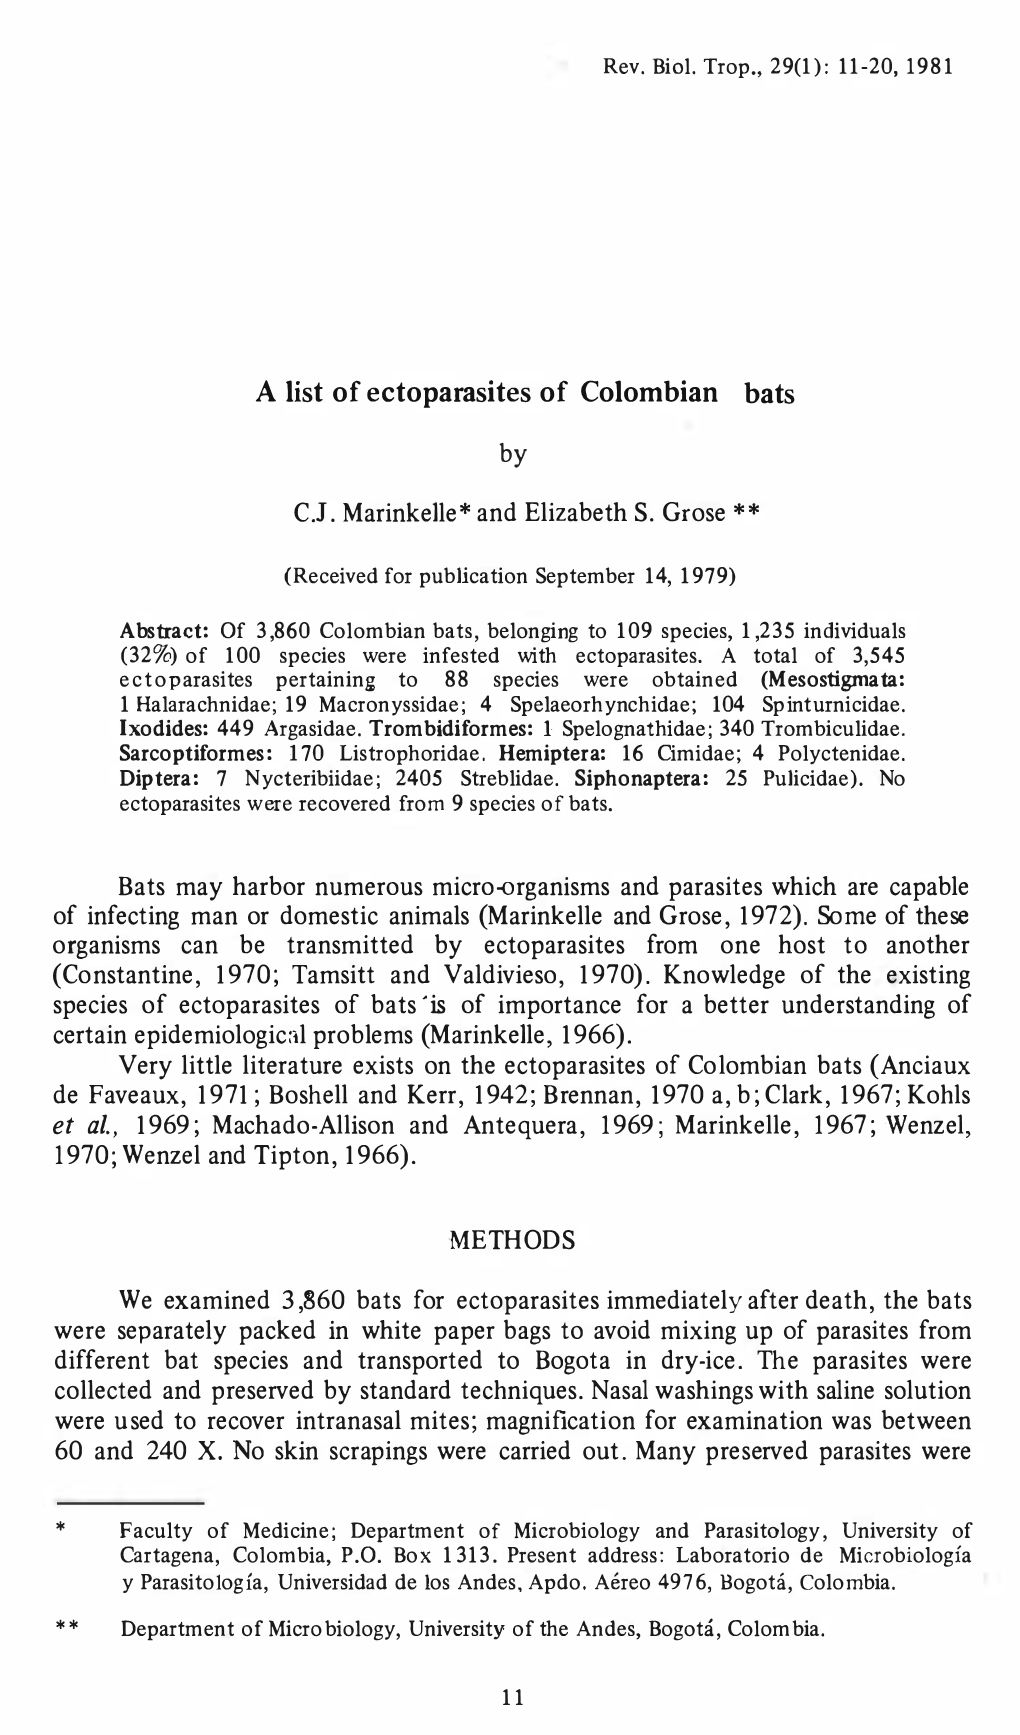 A List of Ectoparasites of Colombian Bats.1